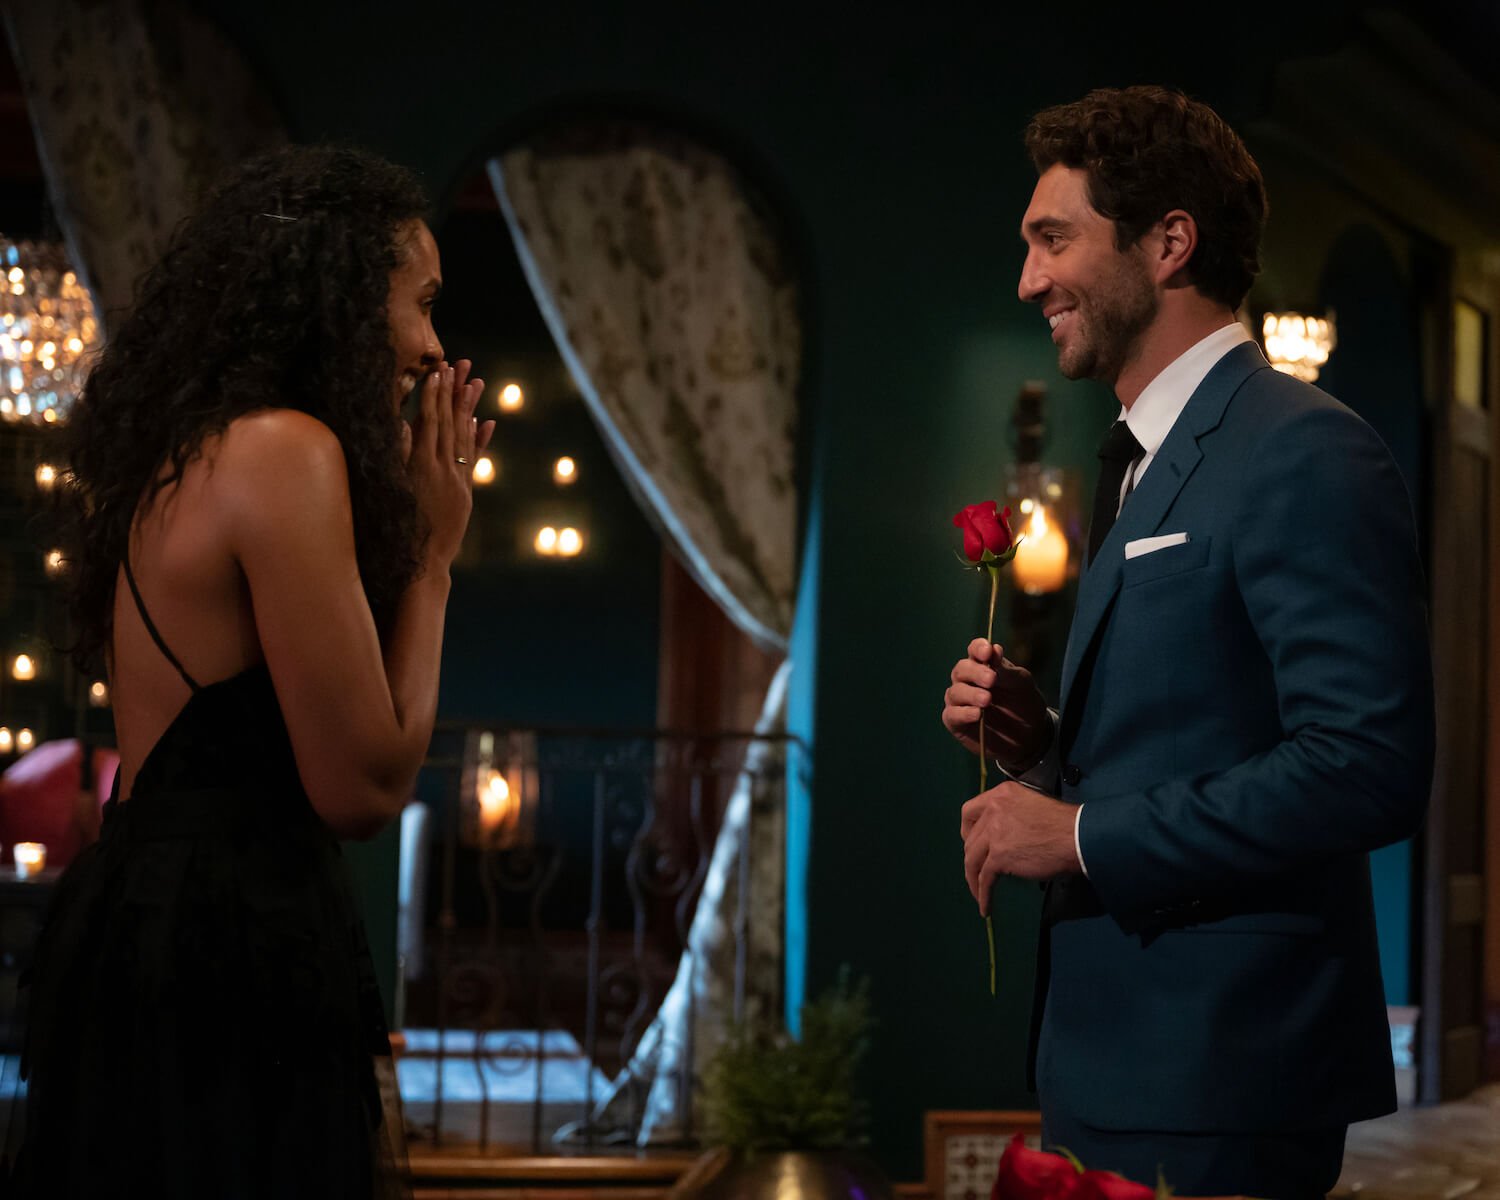 Rachel Nance and Joey Graziadei in 'The Bachelor' Season 28 during the first rose ceremony